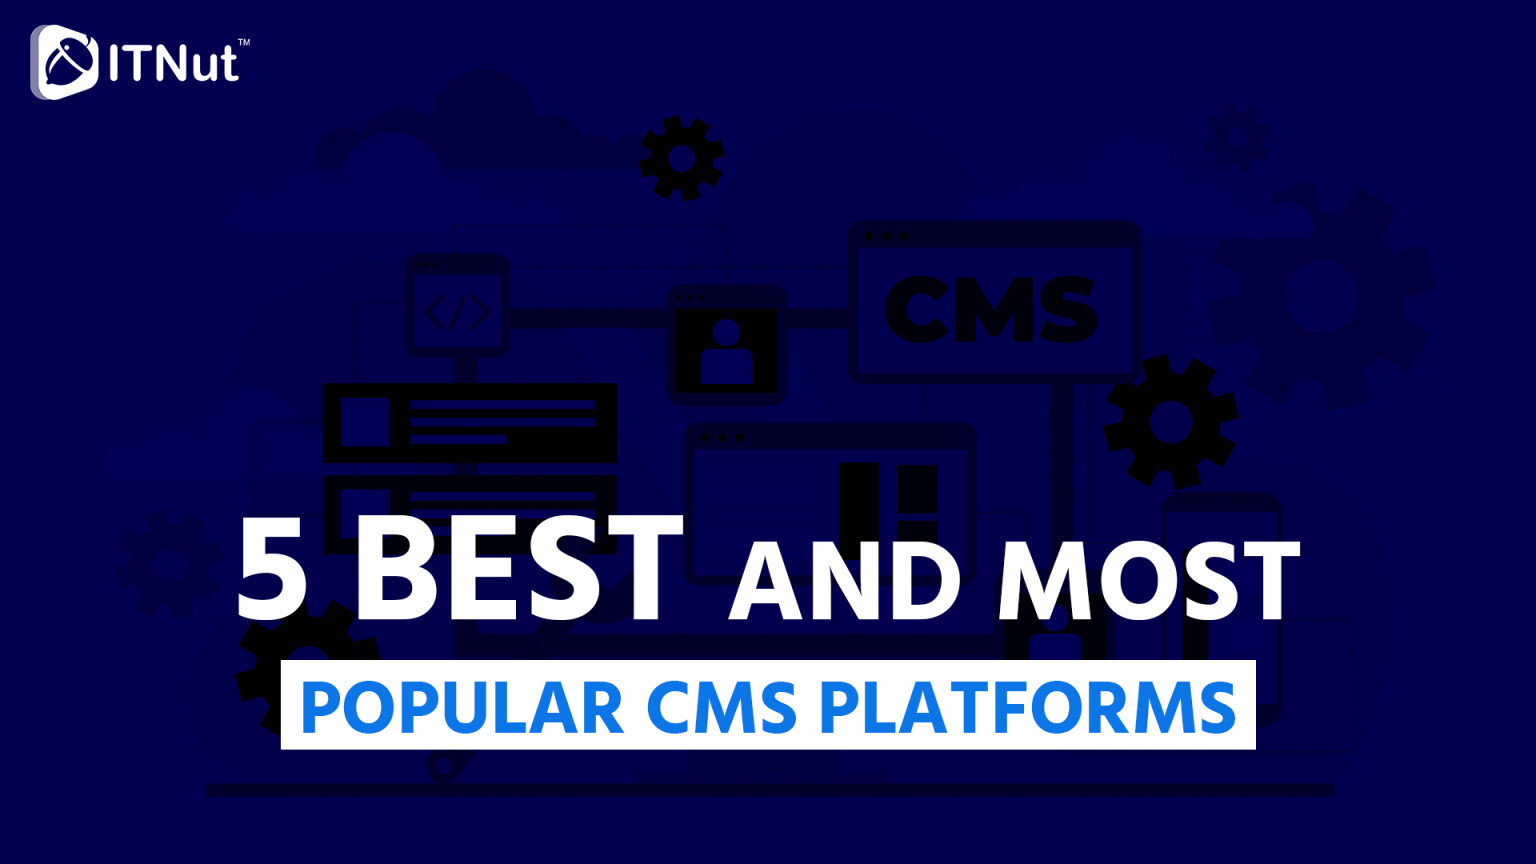 5 Best and Most Popular CMS Platforms